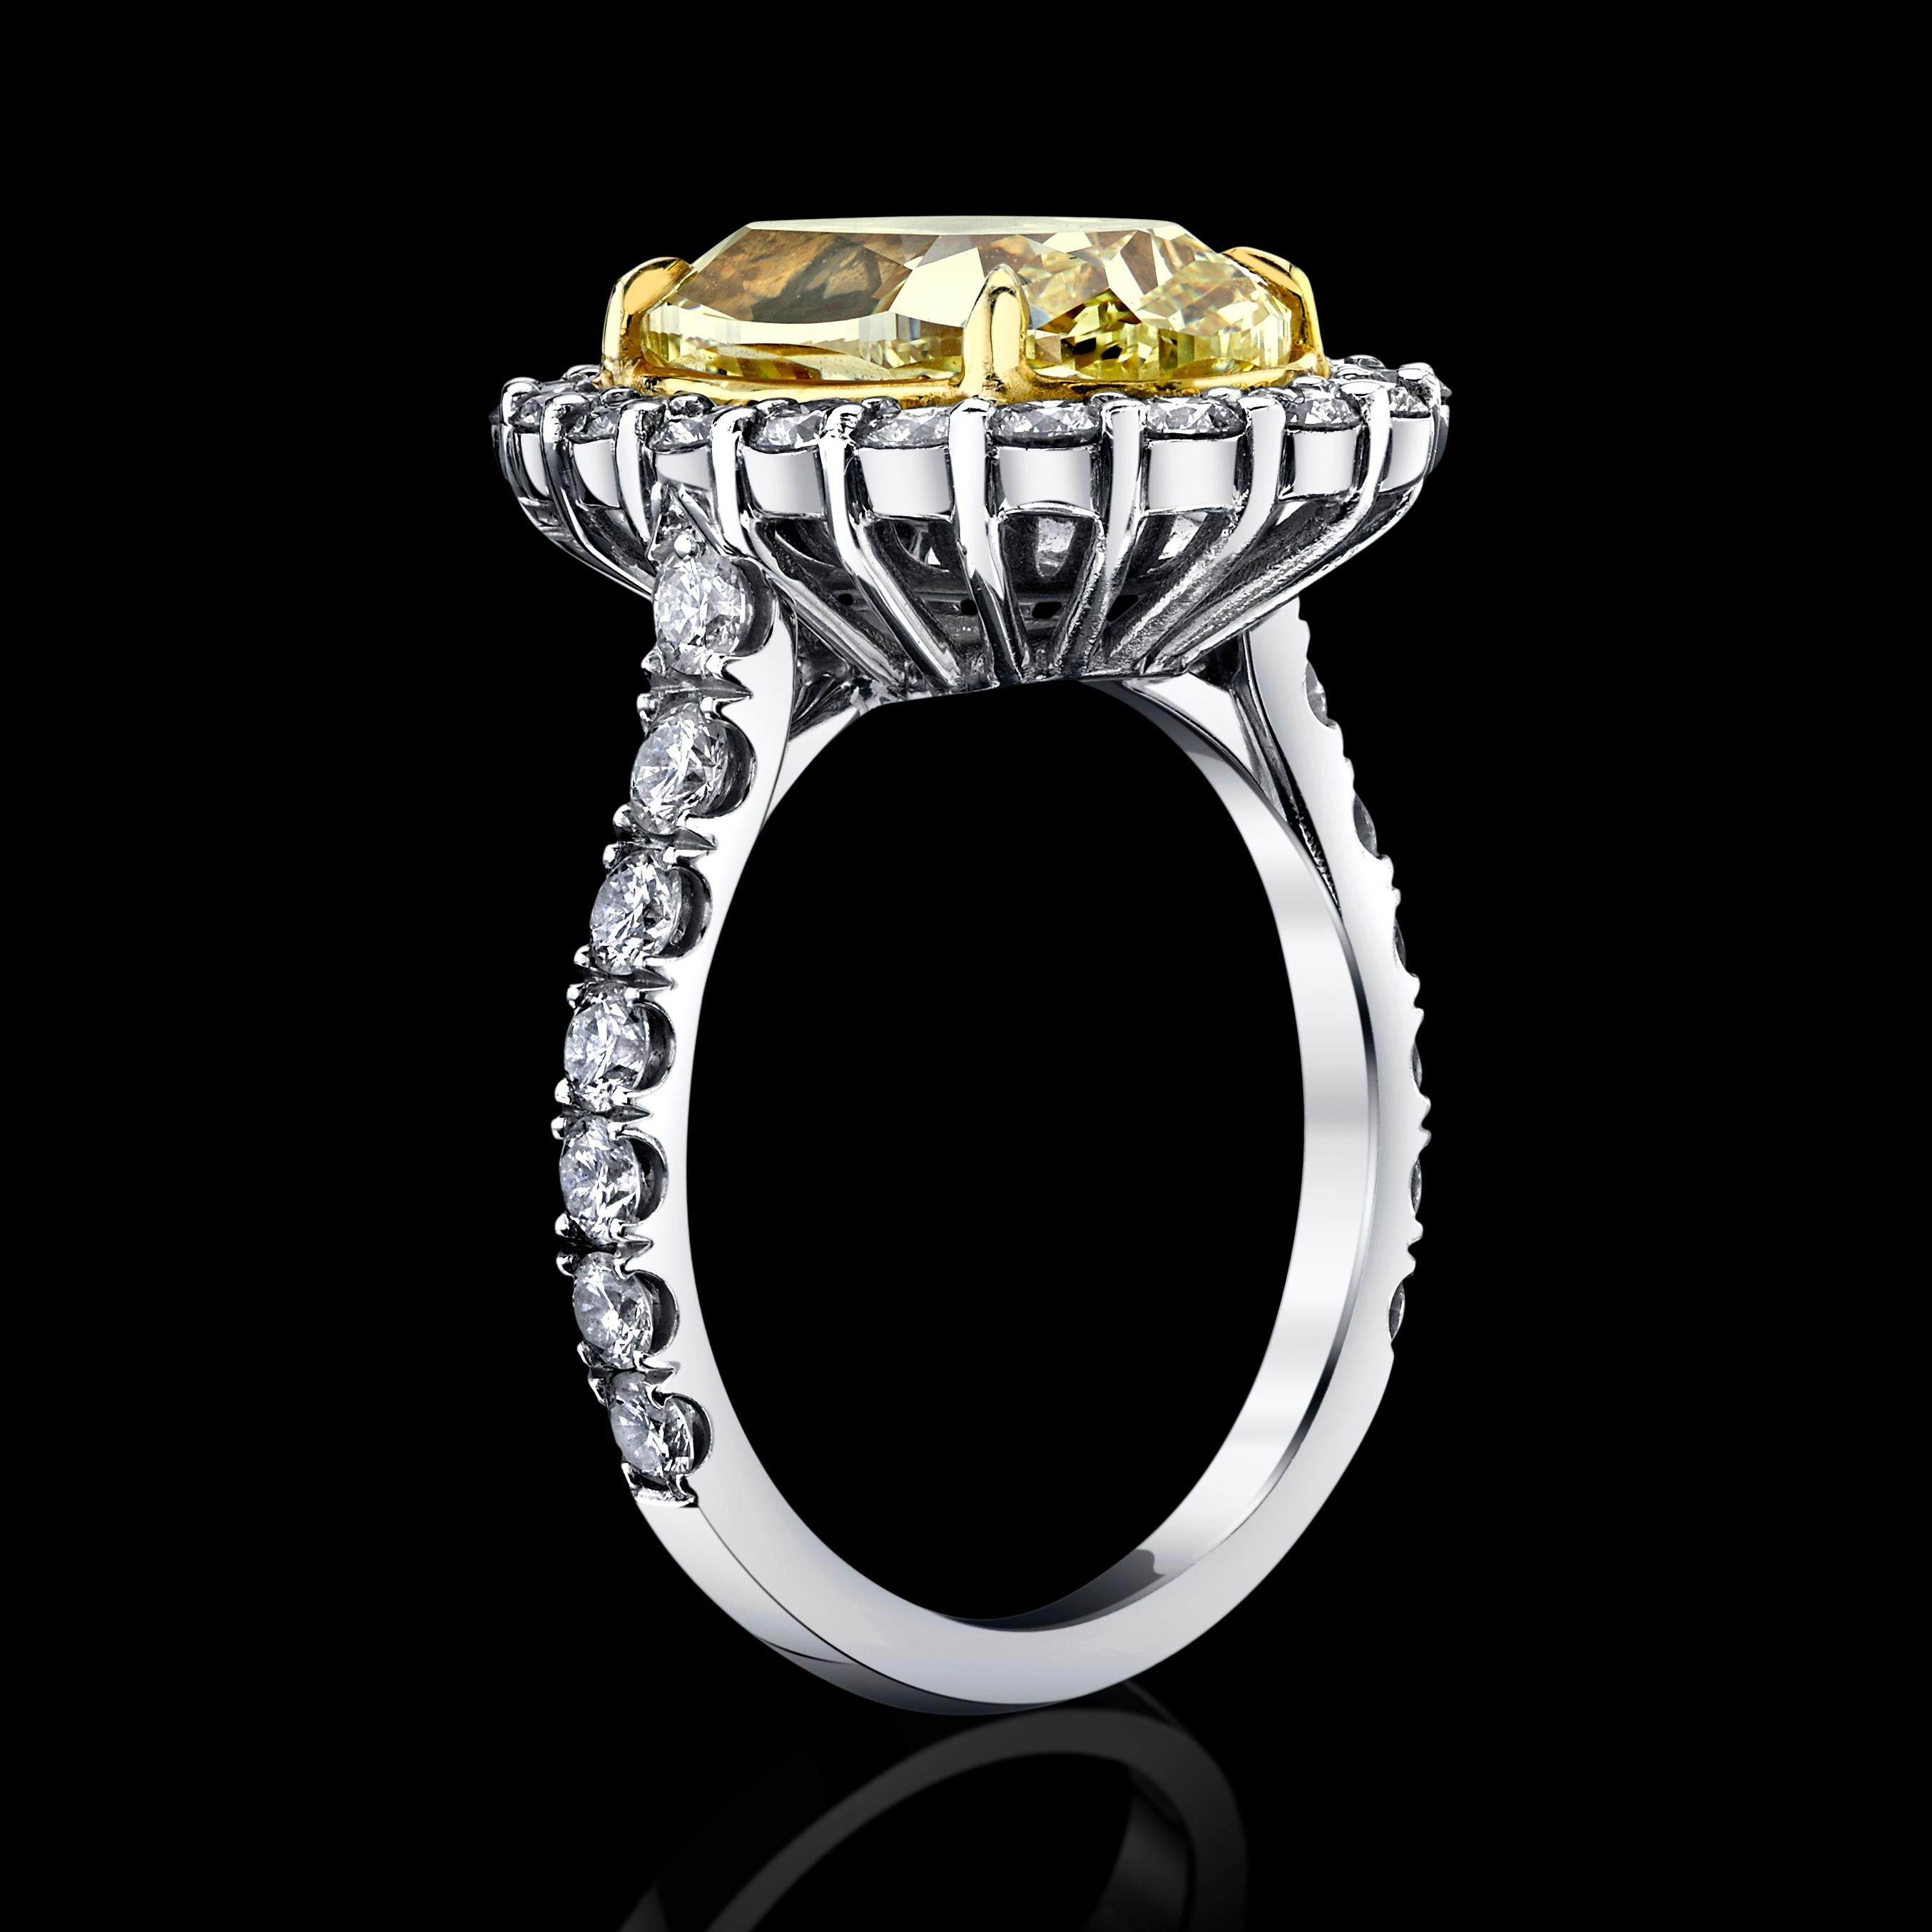 6.08ct Oval Fancy Intense Yellow diamond is set in 18K white Gold, + 34 Round colorless diamonds F color, VS1 clarity =1.58cttw
This large diamond ring shows so beautifully and romantic. The center diamond is large with an intense yellow color that